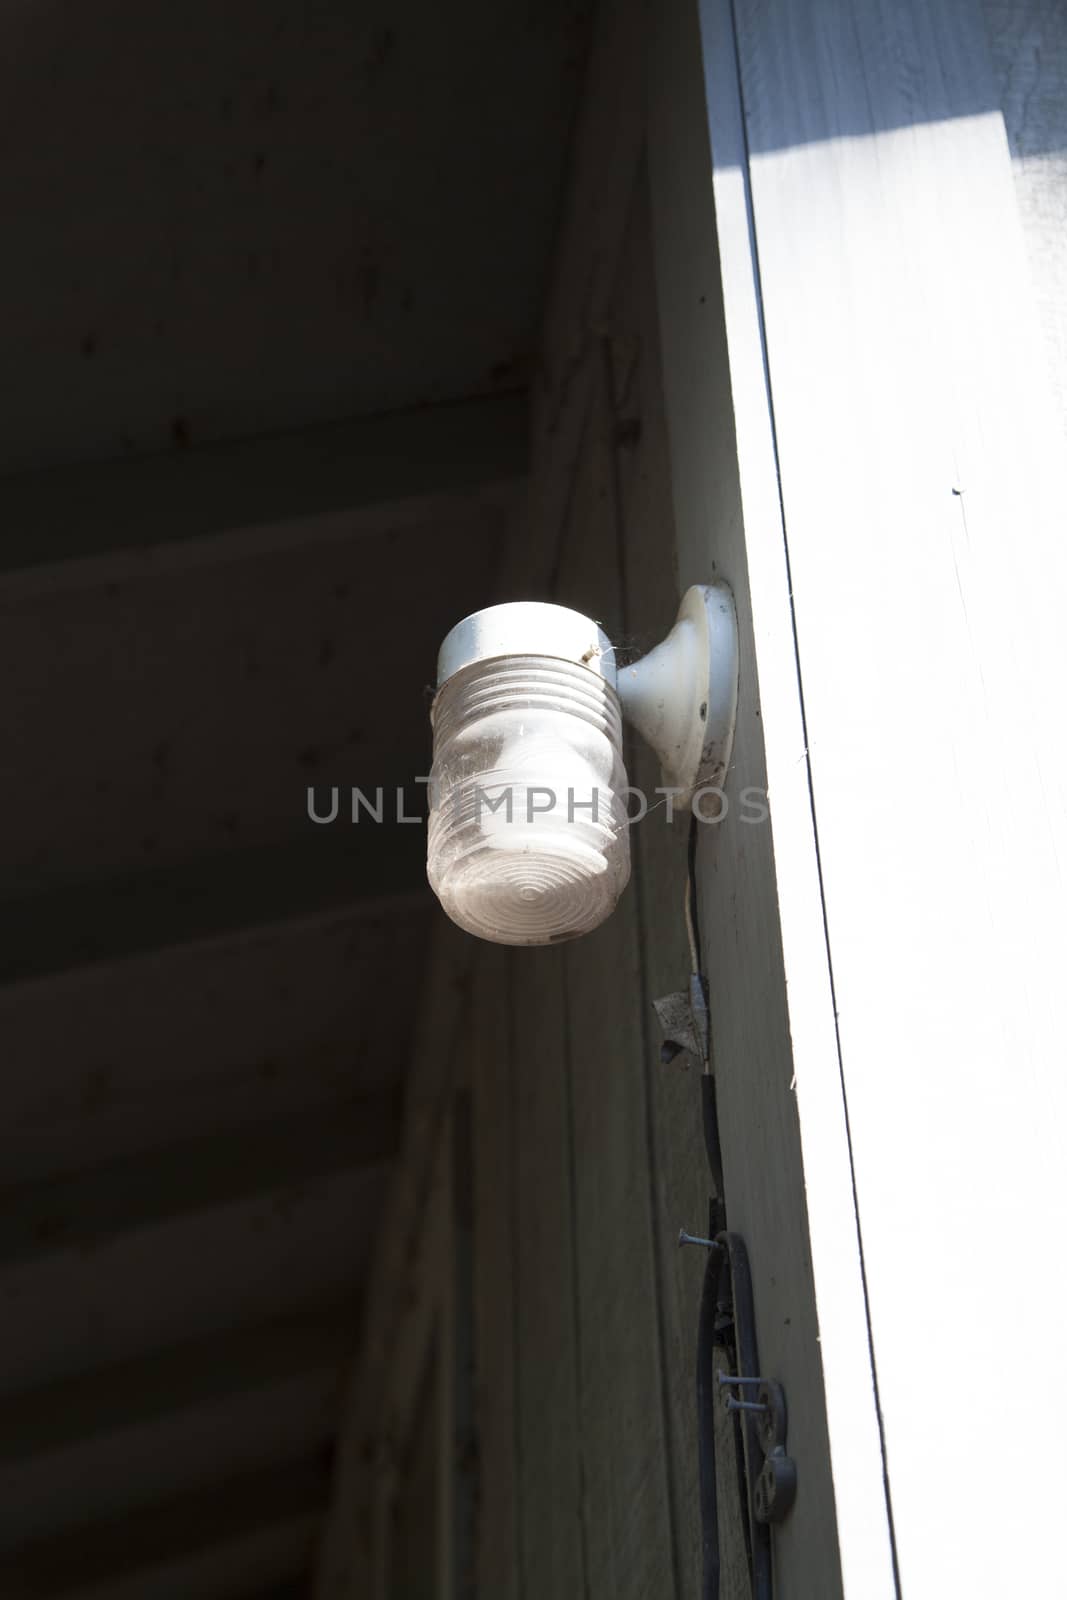 Porch light outside in the daytime